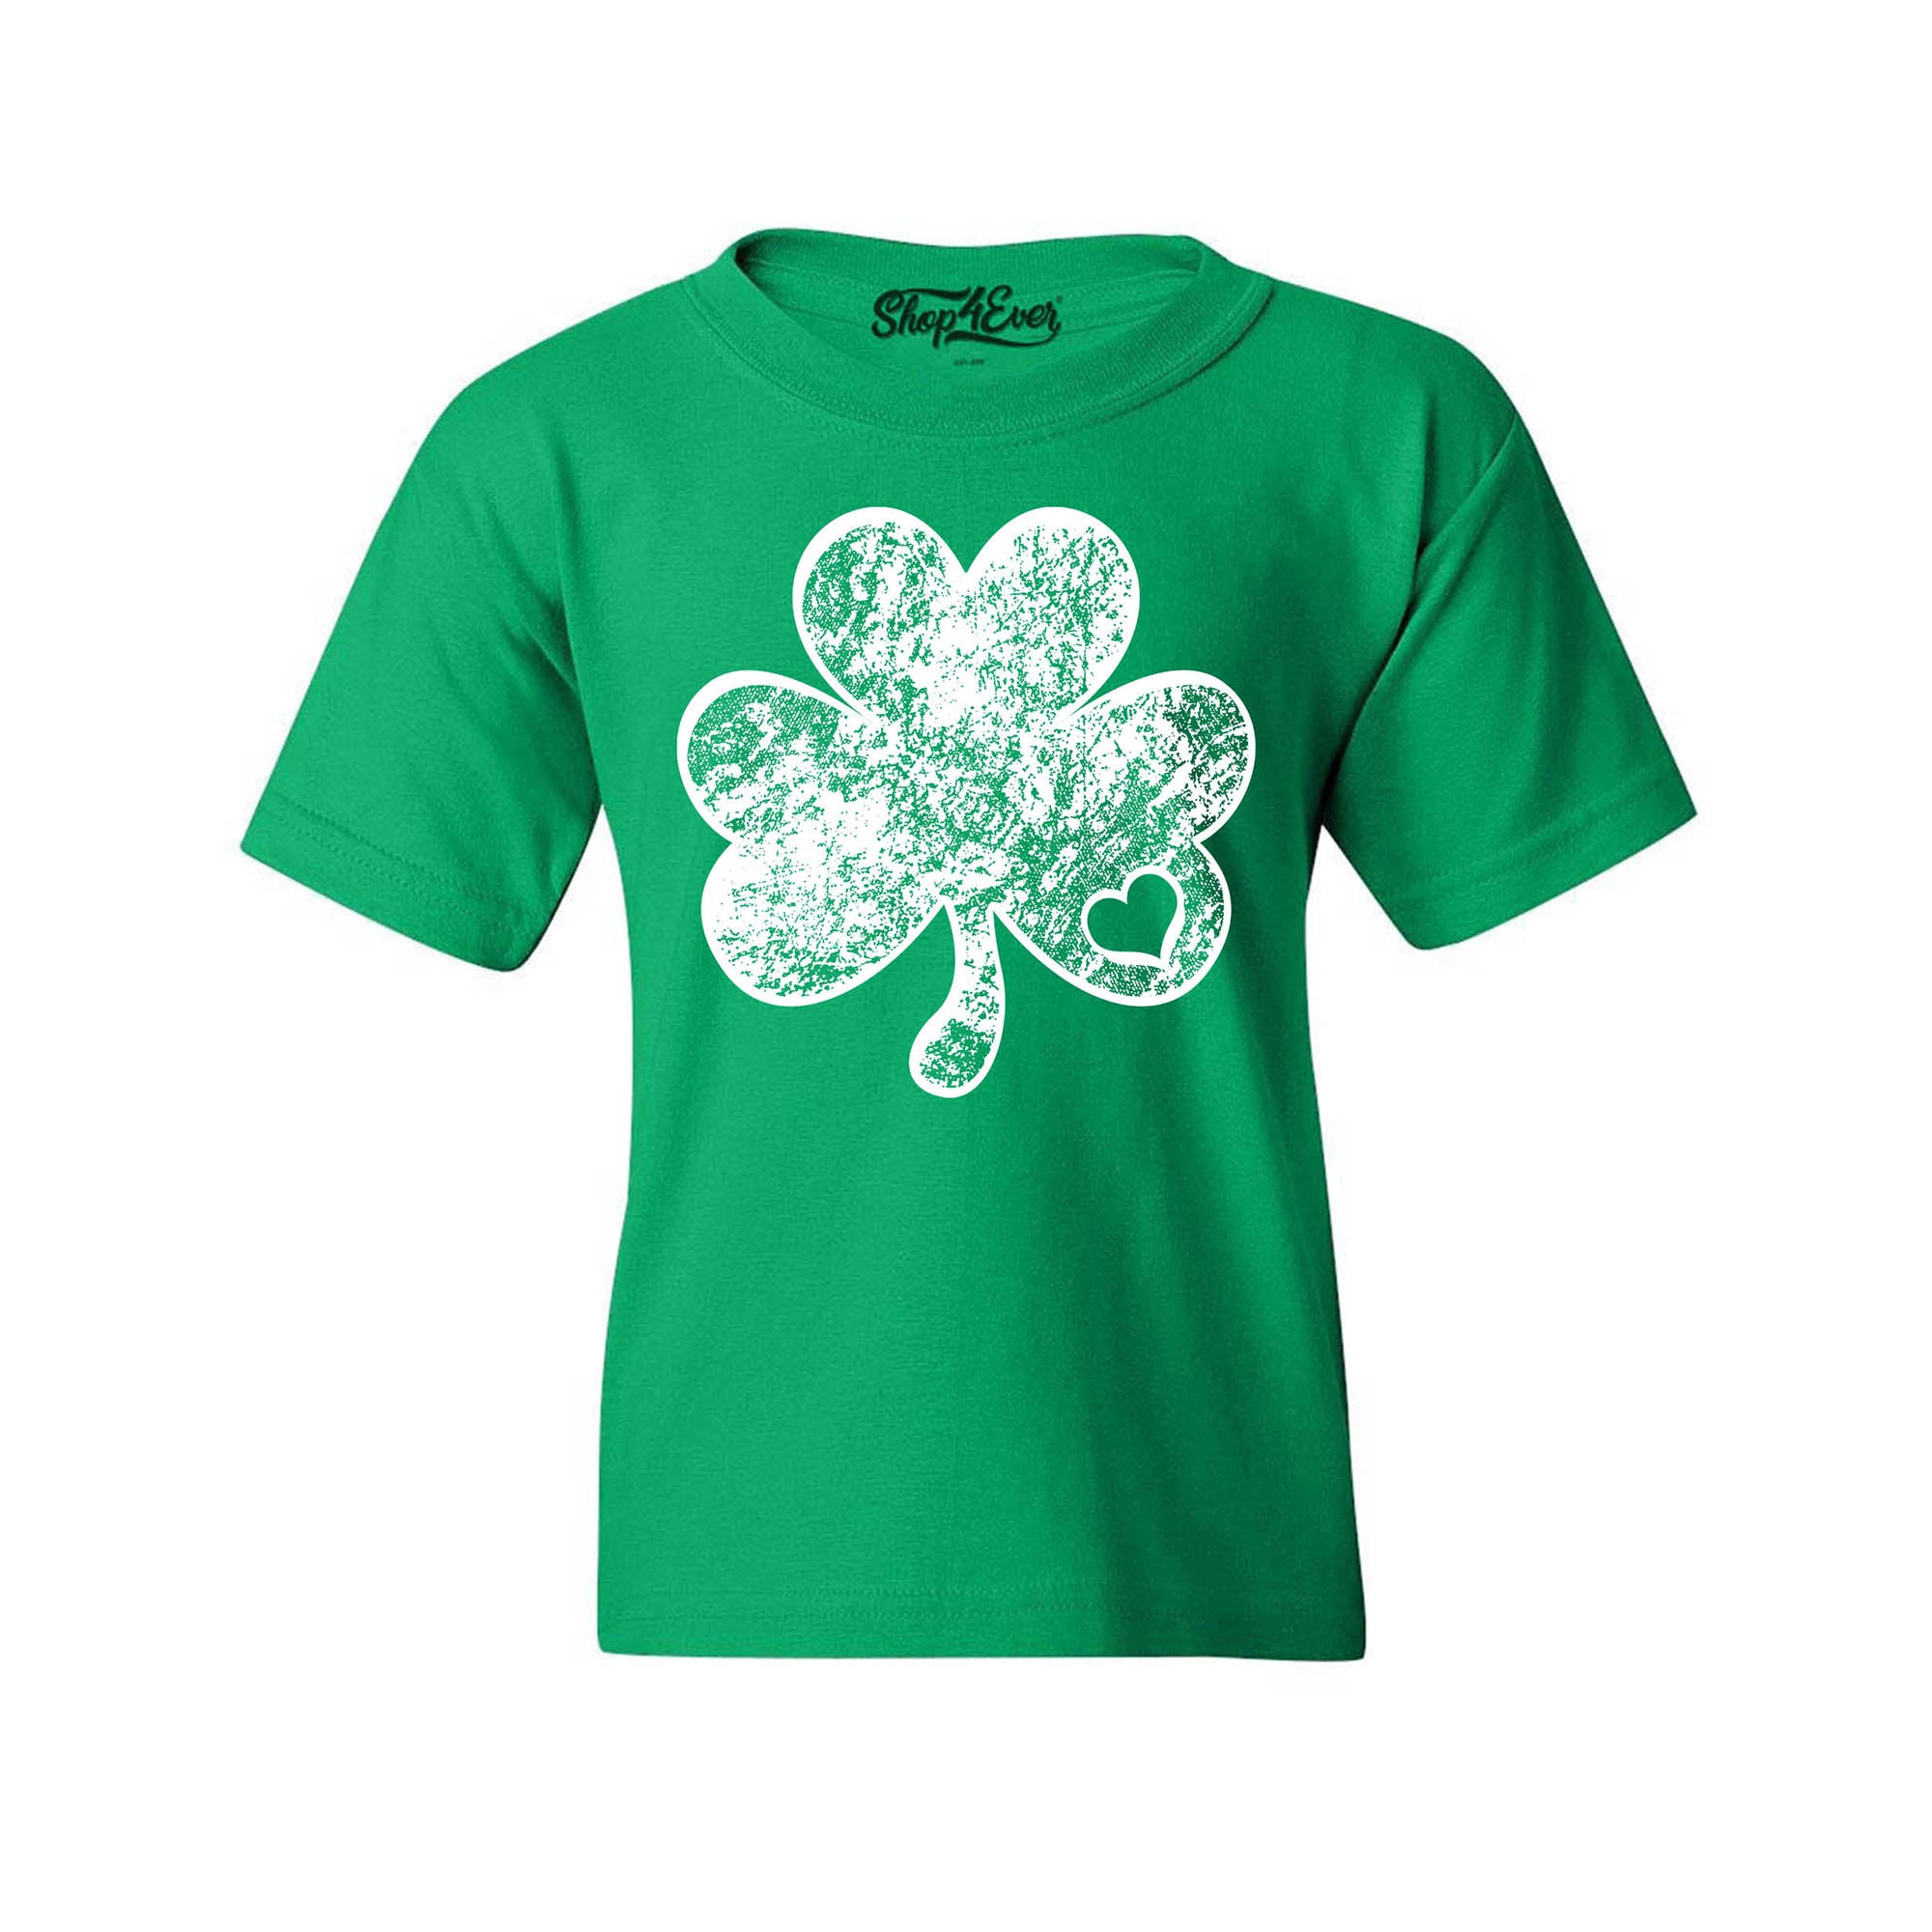 Distressed Irish Shamrock with Heart St. Patrick's Day Youth's T-Shirt